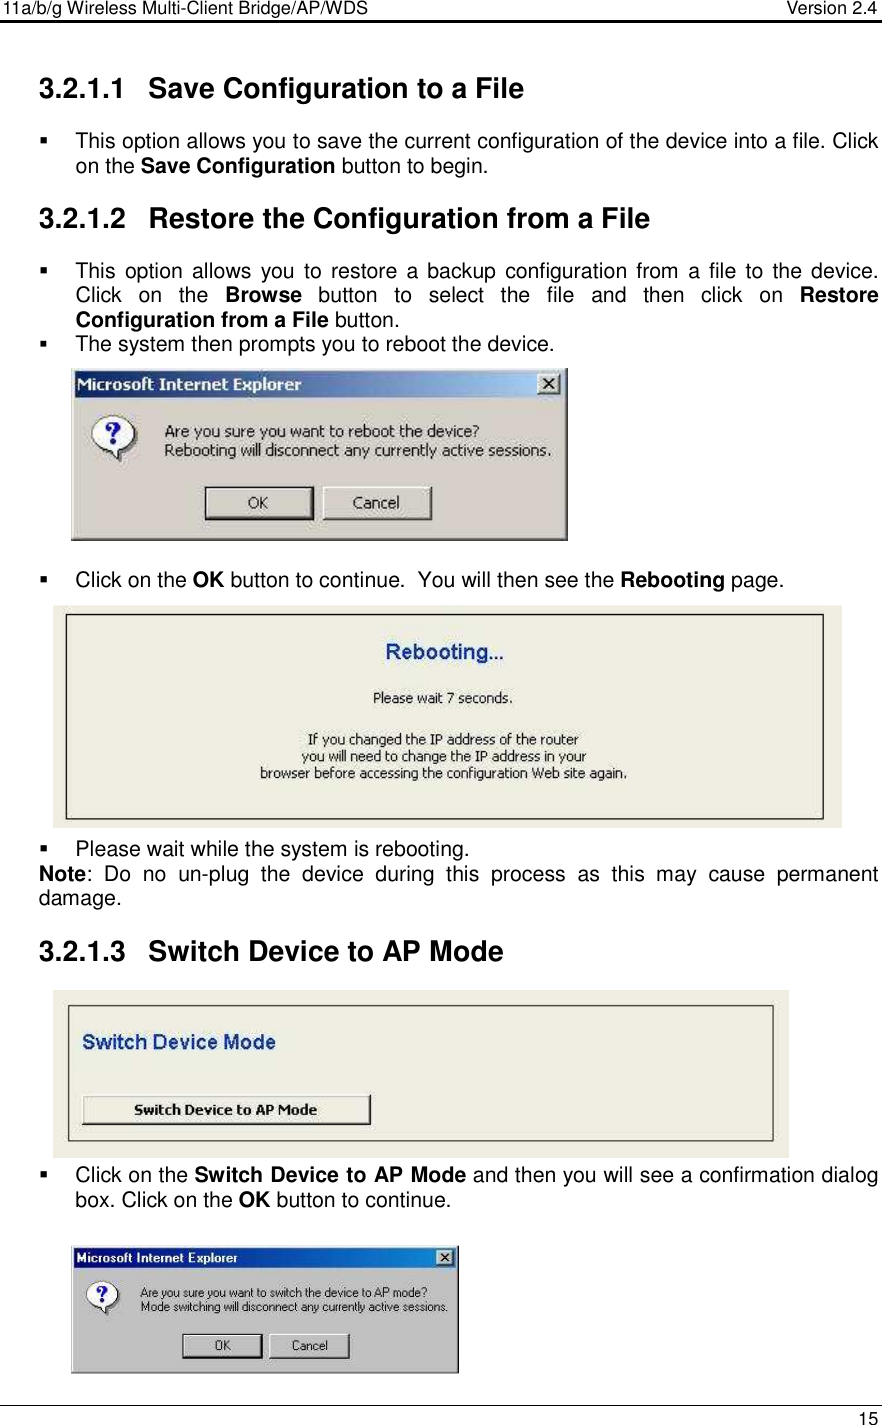 11a/b/g Wireless Multi-Client Bridge/AP/WDS                                  Version 2.4    15  3.2.1.1  Save Configuration to a File   This option allows you to save the current configuration of the device into a file. Click on the Save Configuration button to begin.   3.2.1.2  Restore the Configuration from a File   This  option allows  you to restore  a  backup configuration from  a file  to the device. Click  on  the  Browse  button  to  select  the  file  and  then  click  on  Restore Configuration from a File button.  The system then prompts you to reboot the device.             Click on the OK button to continue.  You will then see the Rebooting page.              Please wait while the system is rebooting.  Note:  Do  no  un-plug  the  device  during  this  process  as  this  may  cause  permanent damage.   3.2.1.3  Switch Device to AP Mode          Click on the Switch Device to AP Mode and then you will see a confirmation dialog box. Click on the OK button to continue.      